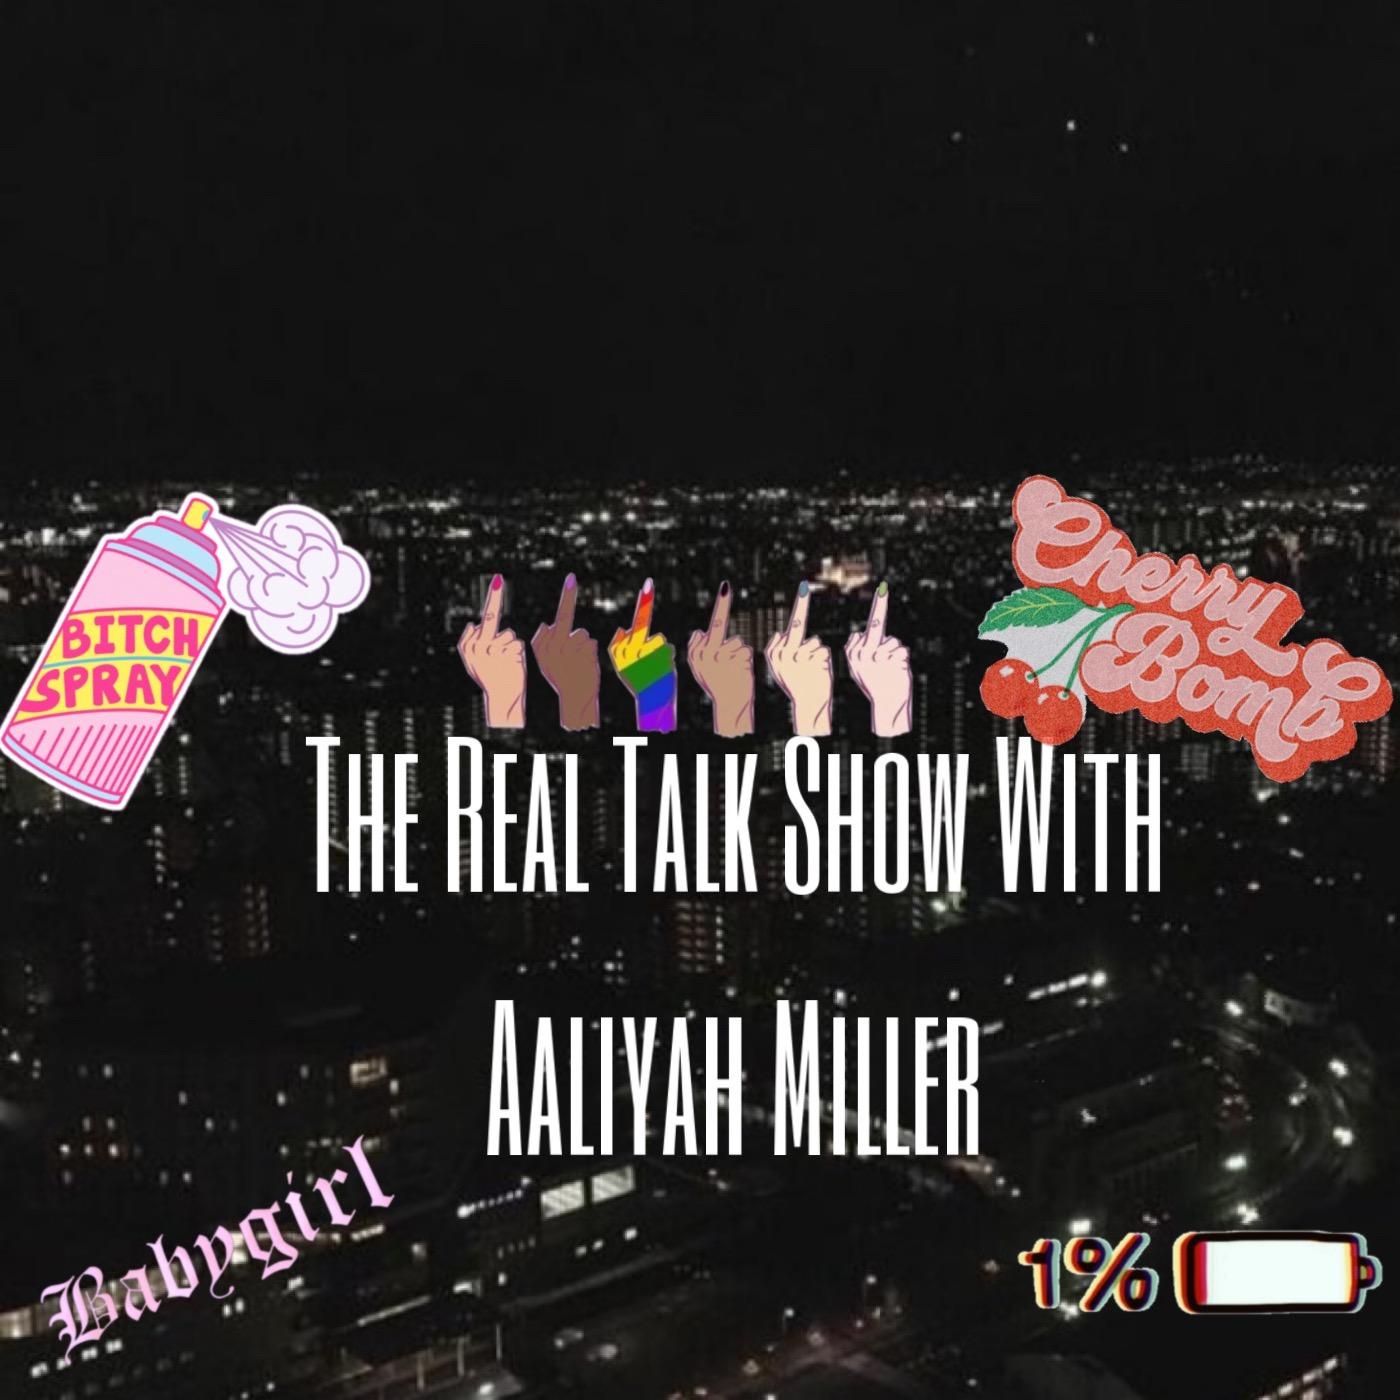 The Real Talk Show With Aaliyah Miller